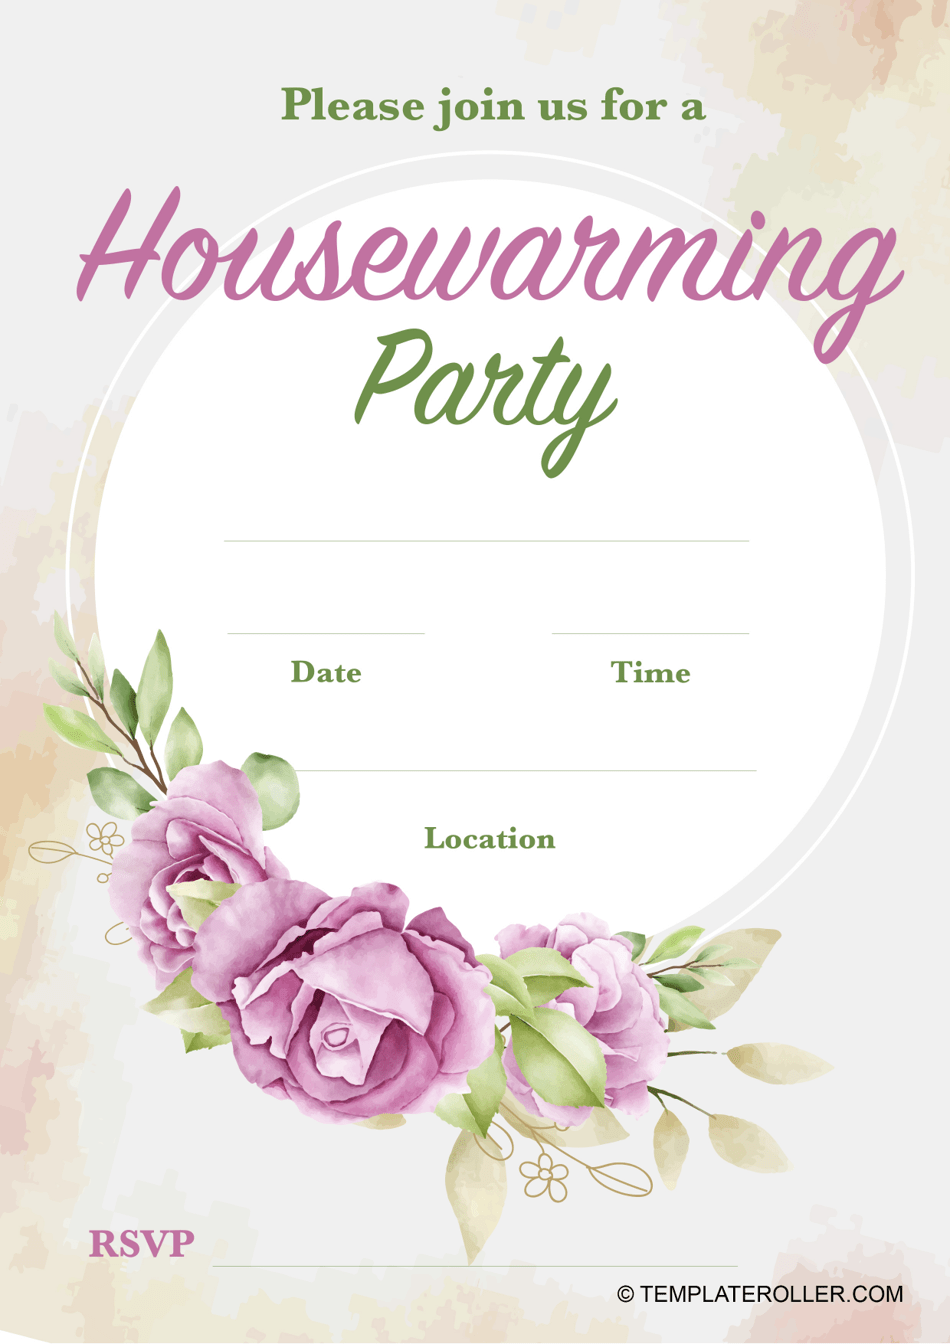 Housewarming party invitation template with colorful flowers